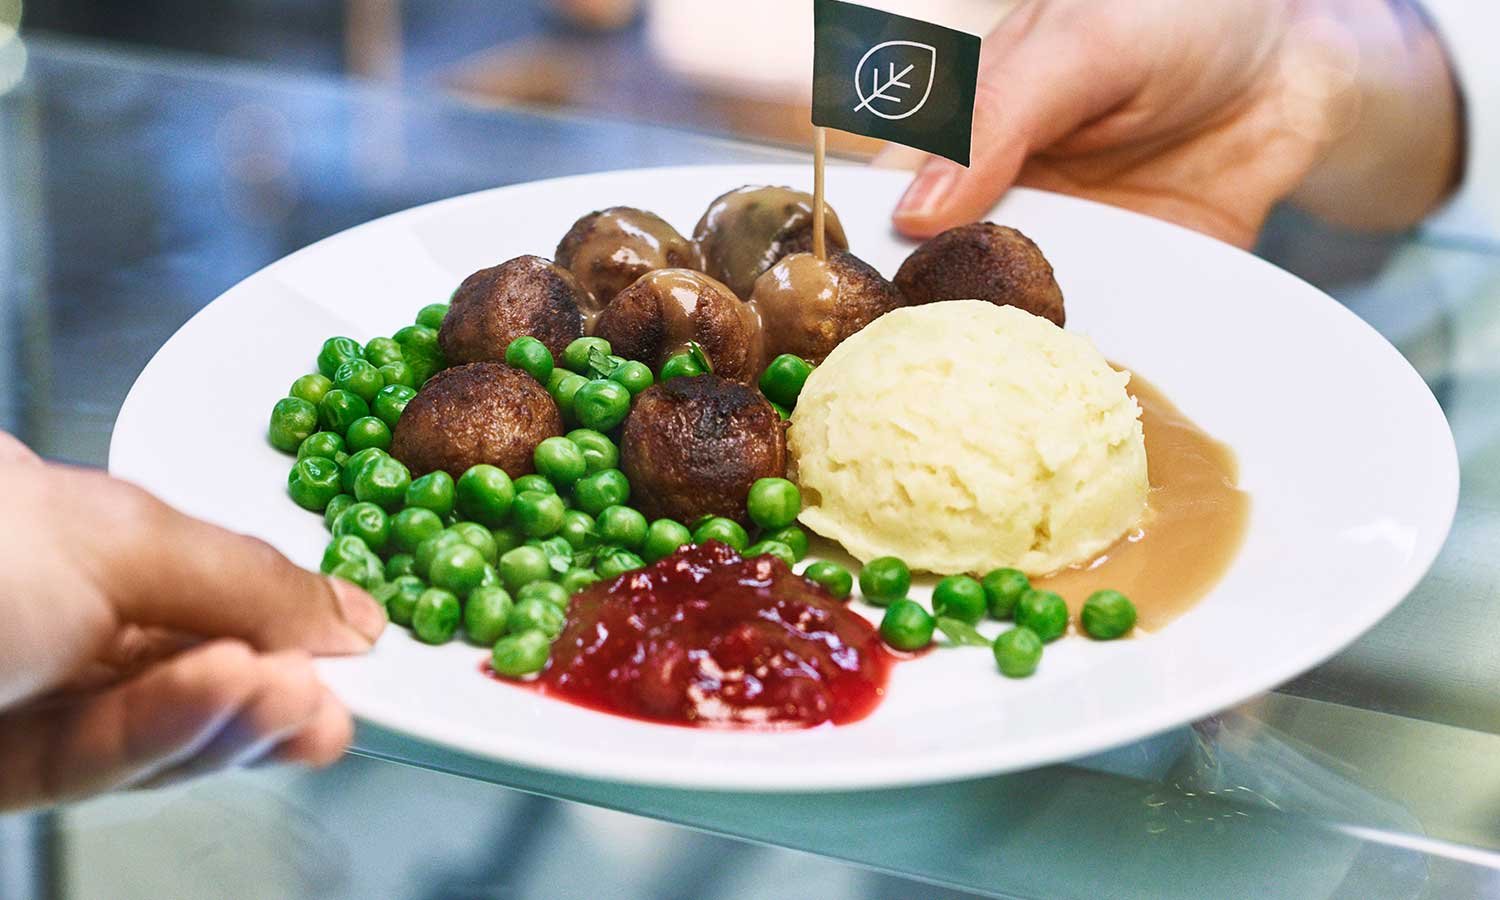 IKEA commits to 50% of meals plant-based by 2025